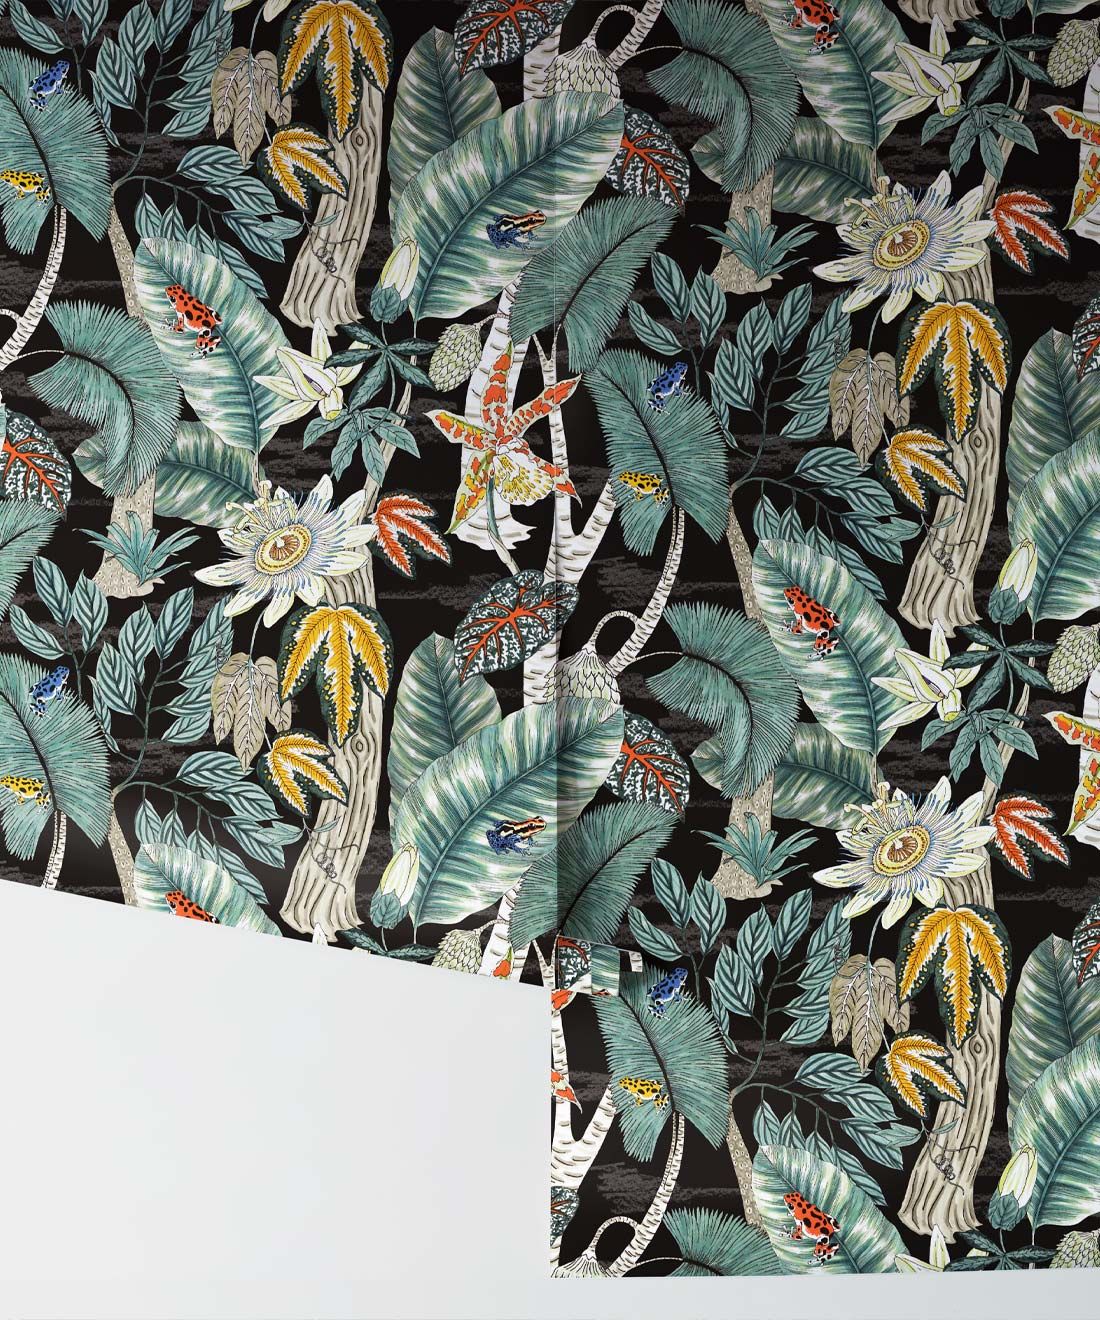 Amazonian Frogs Wallpaper • Tropical Leaves Wallpaper • Jacqueline Colley • Rolls